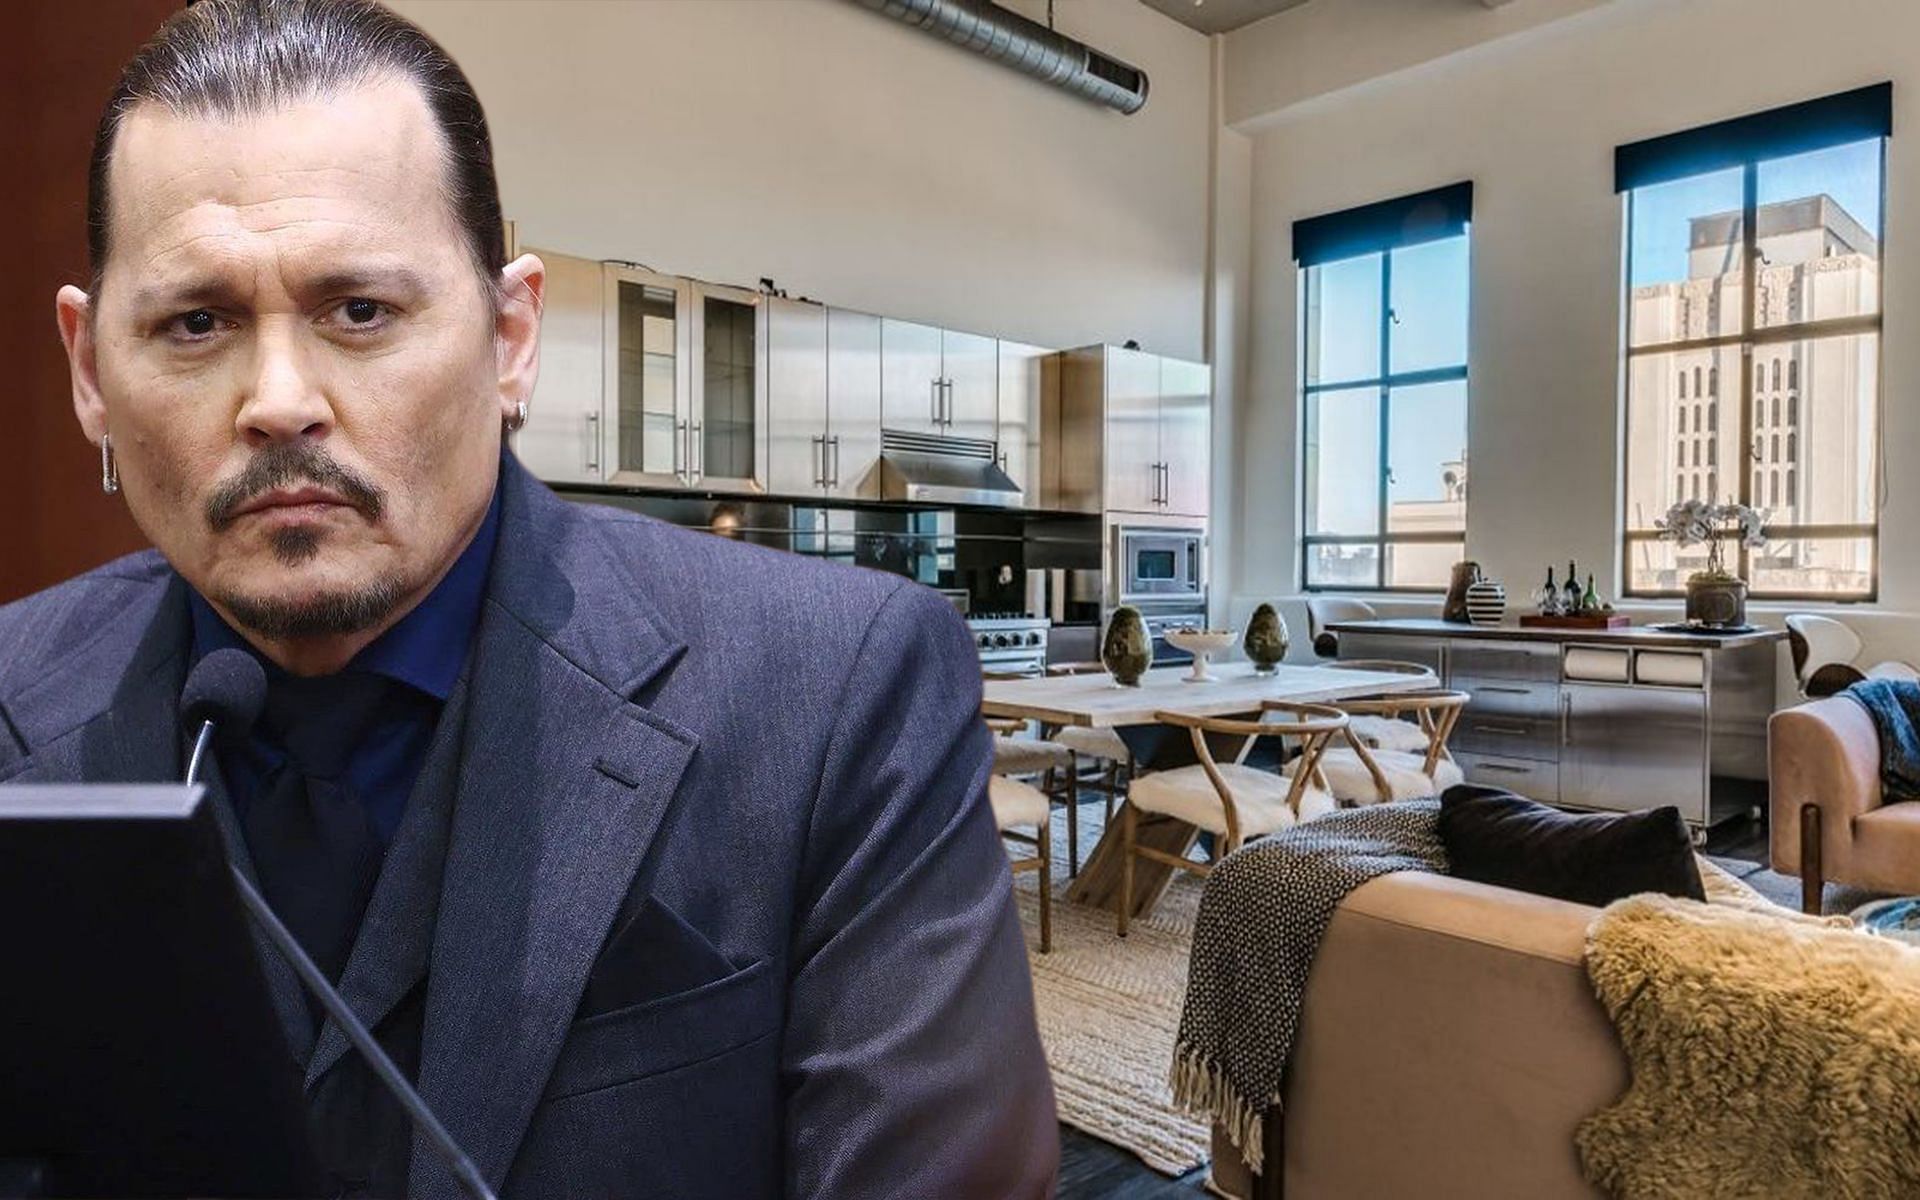 Johnny Depp and Amber Heard&#039;s Los Angeles penthouse unit up for sale (Image via AP and Douglas Elliman Realty)